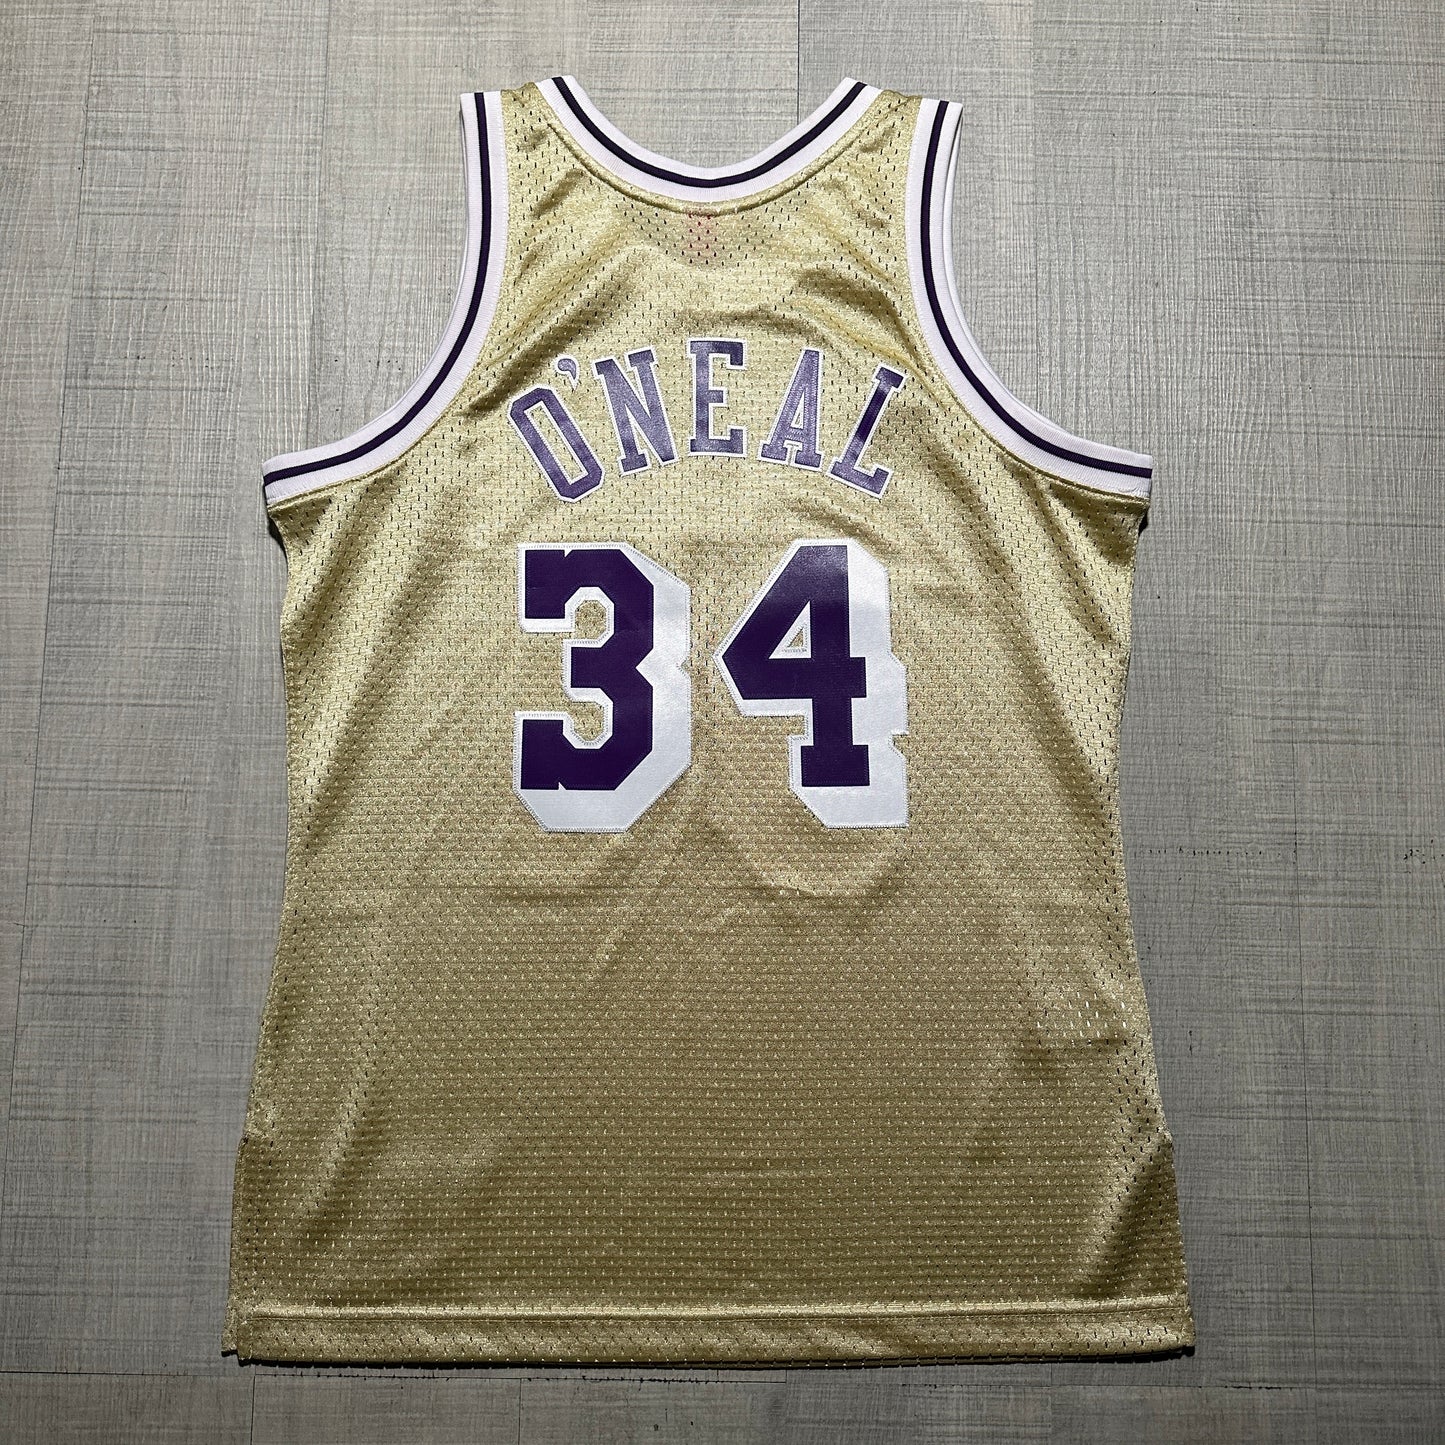 Shaquille O’Neal LA Lakers 96-97 Mitchell & Ness Jersey